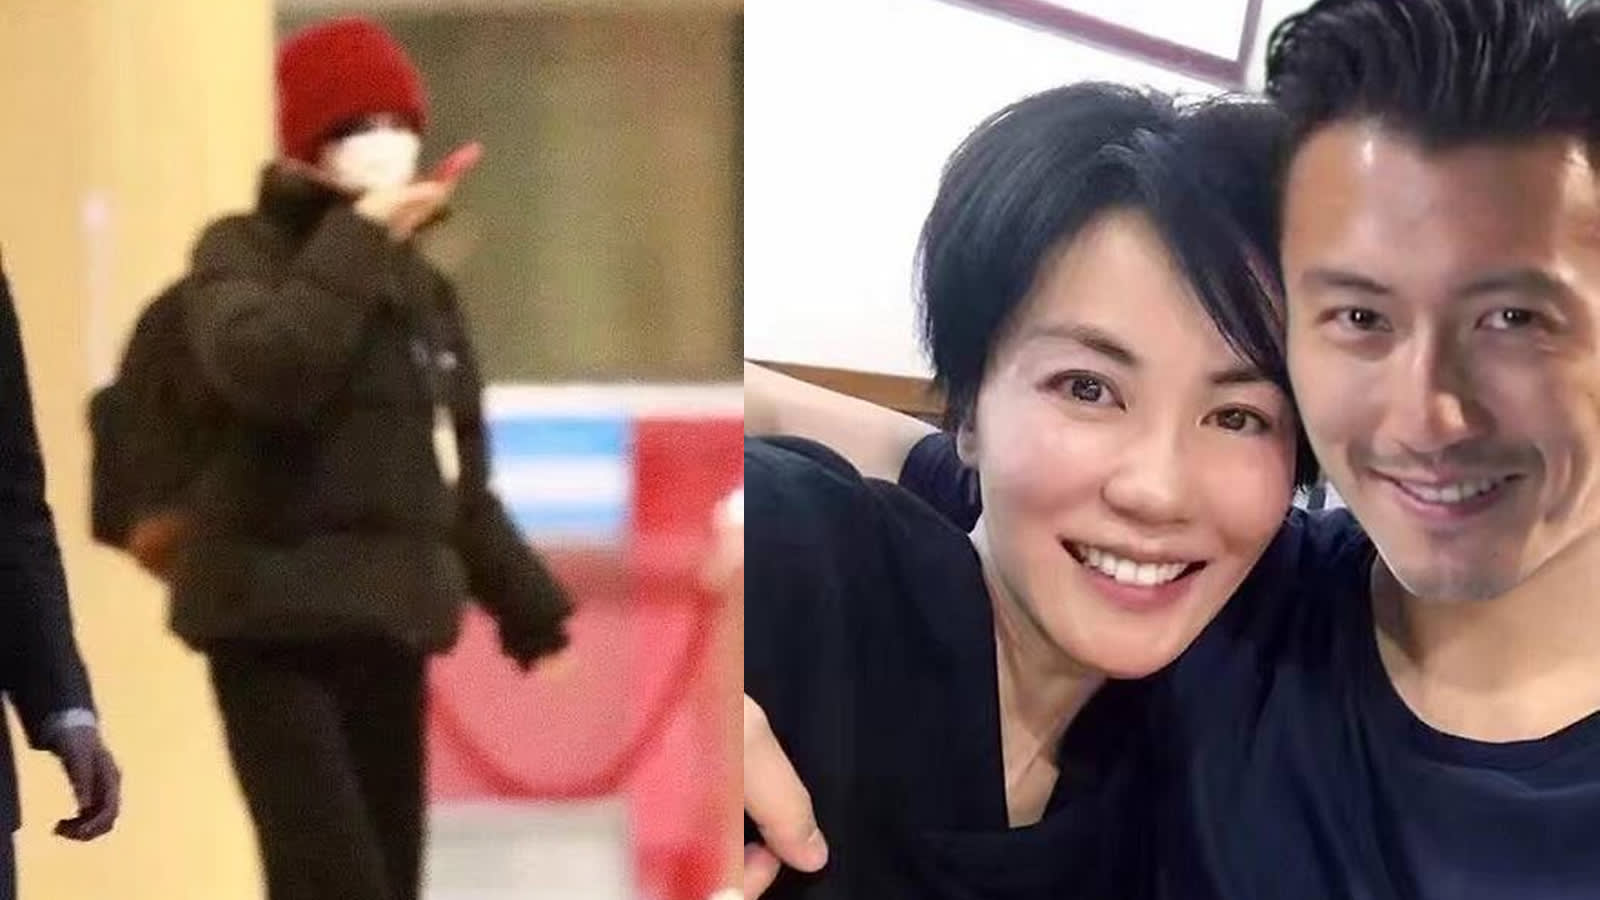 Netizen Spots Nicholas Tse And Faye Wong At The Airport Together; Says That He Looks “Fierce”